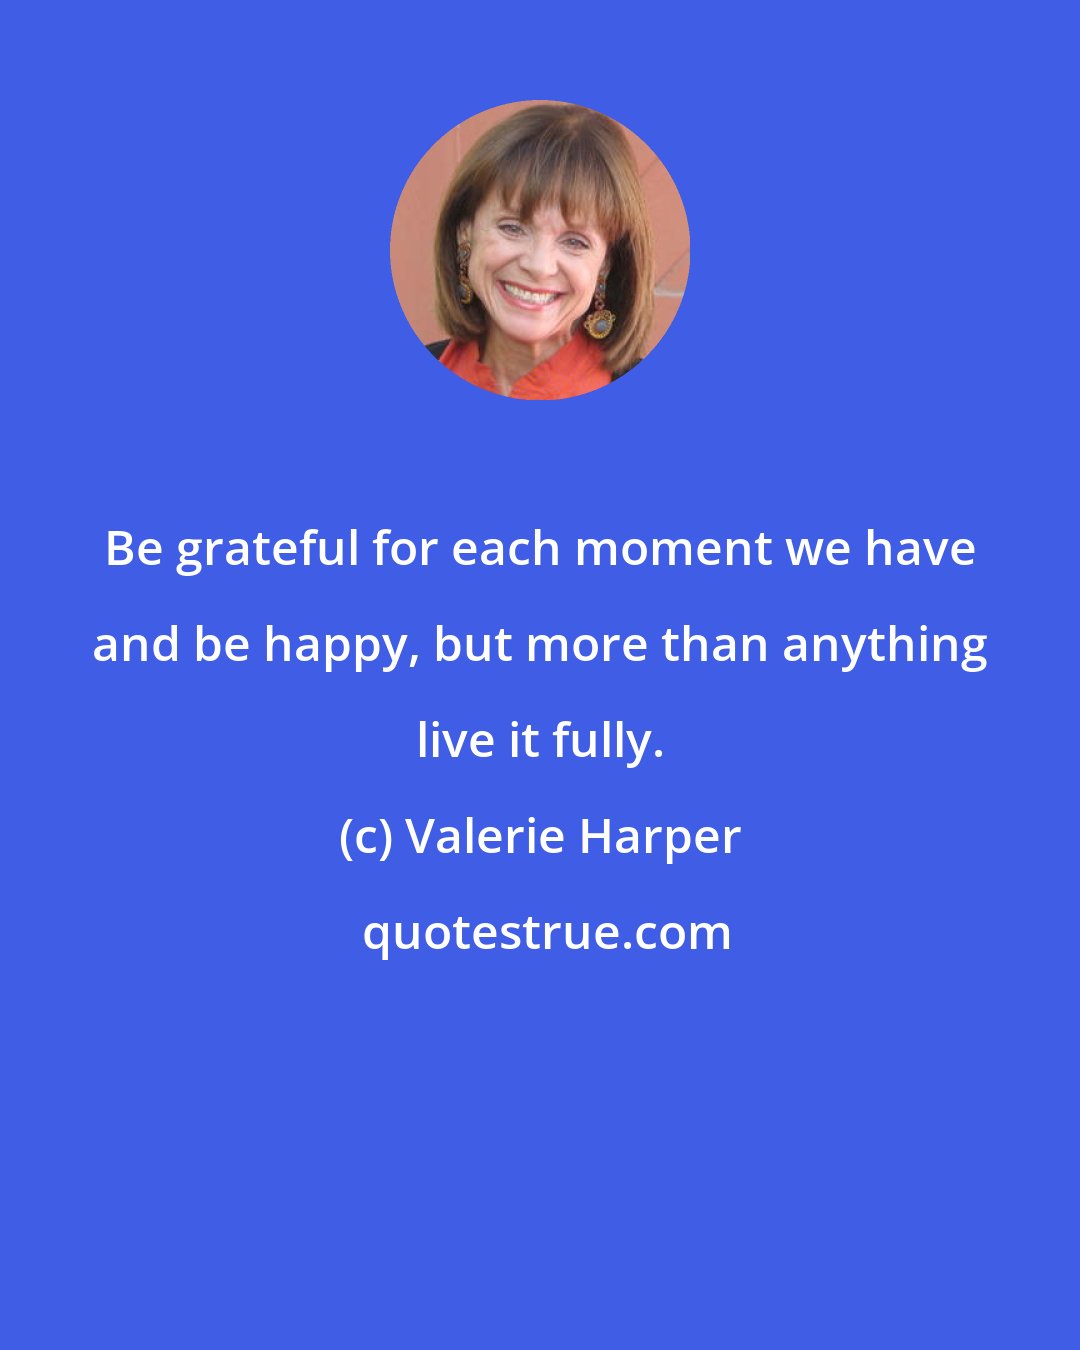 Valerie Harper: Be grateful for each moment we have and be happy, but more than anything live it fully.